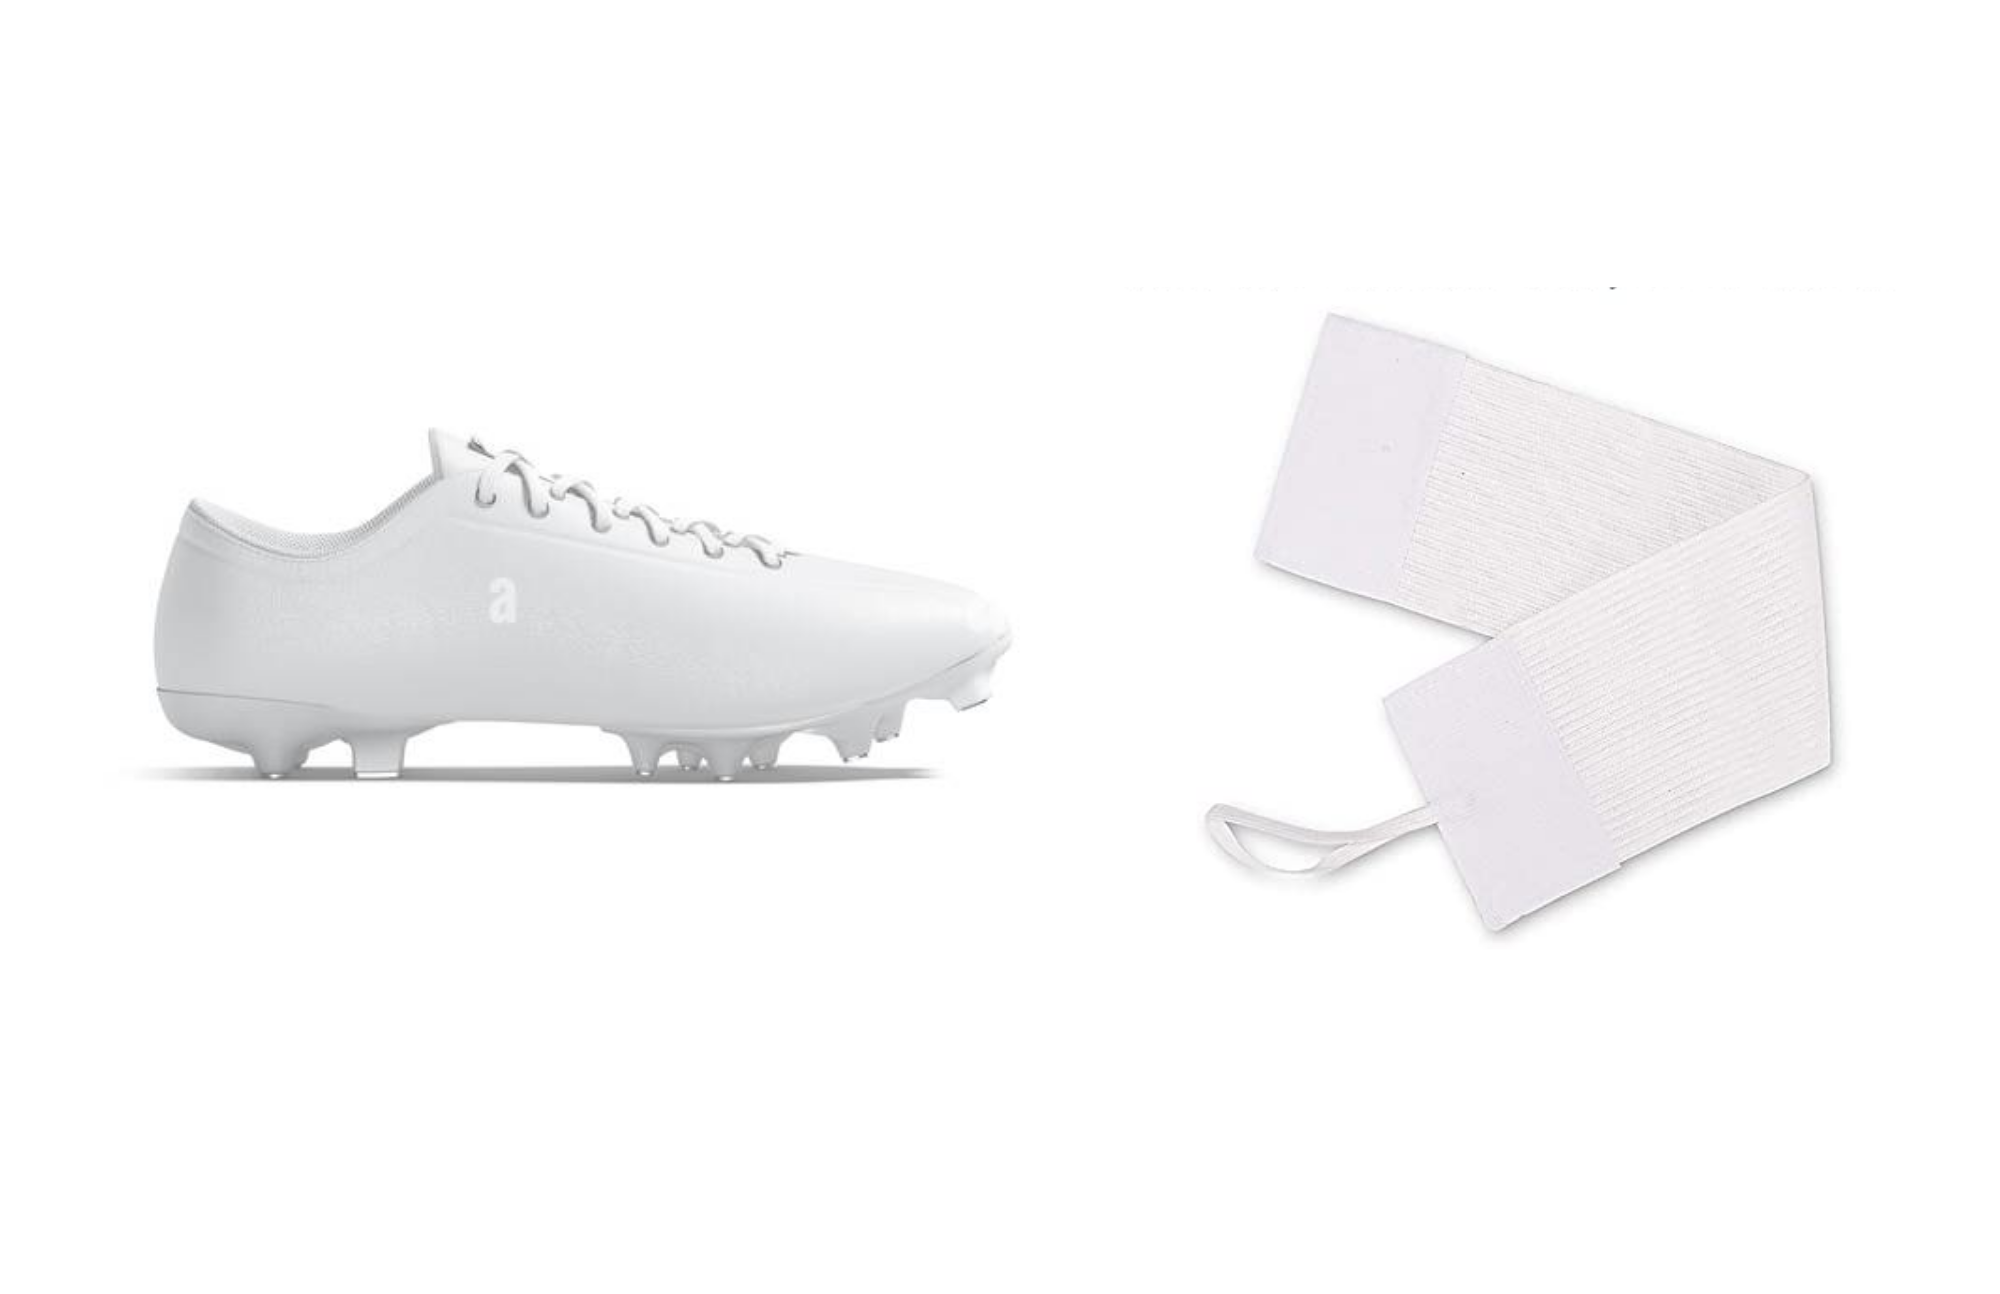 Plain cleats and armbands for soccer